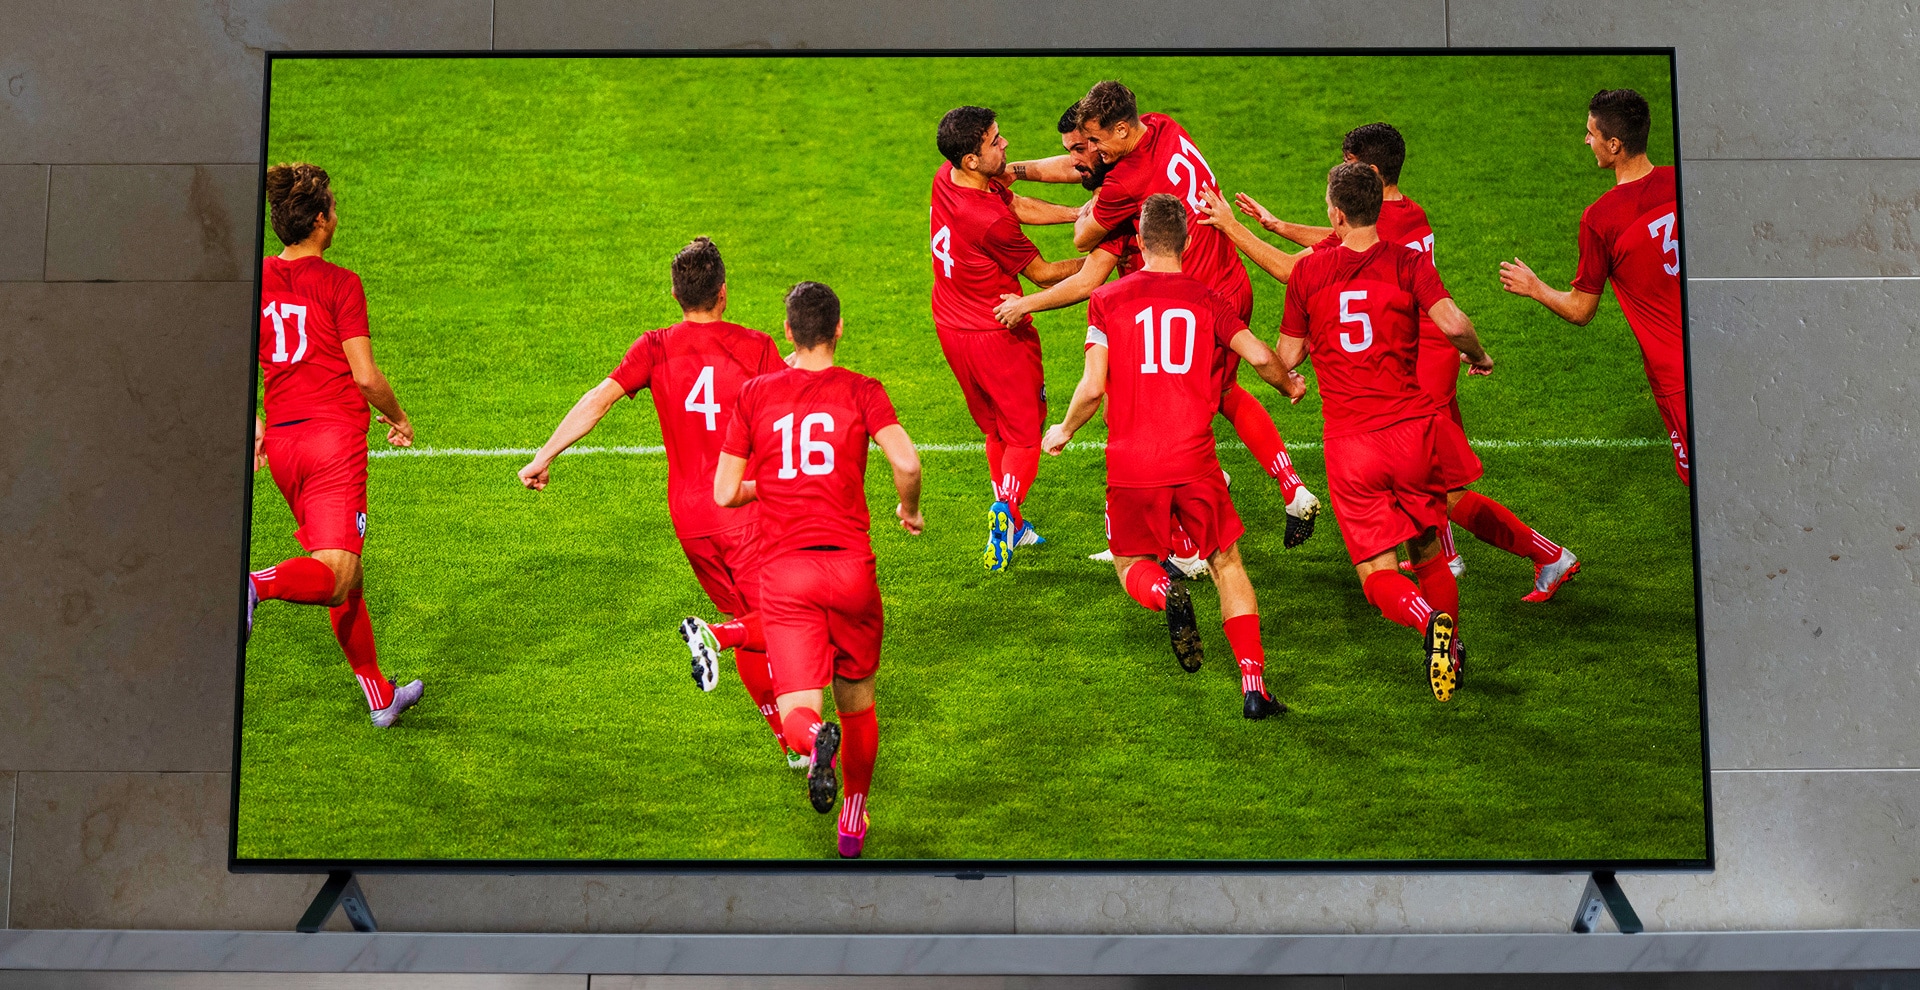 A Nanocell TV is on a TV stand. Soccer players are celebrating.